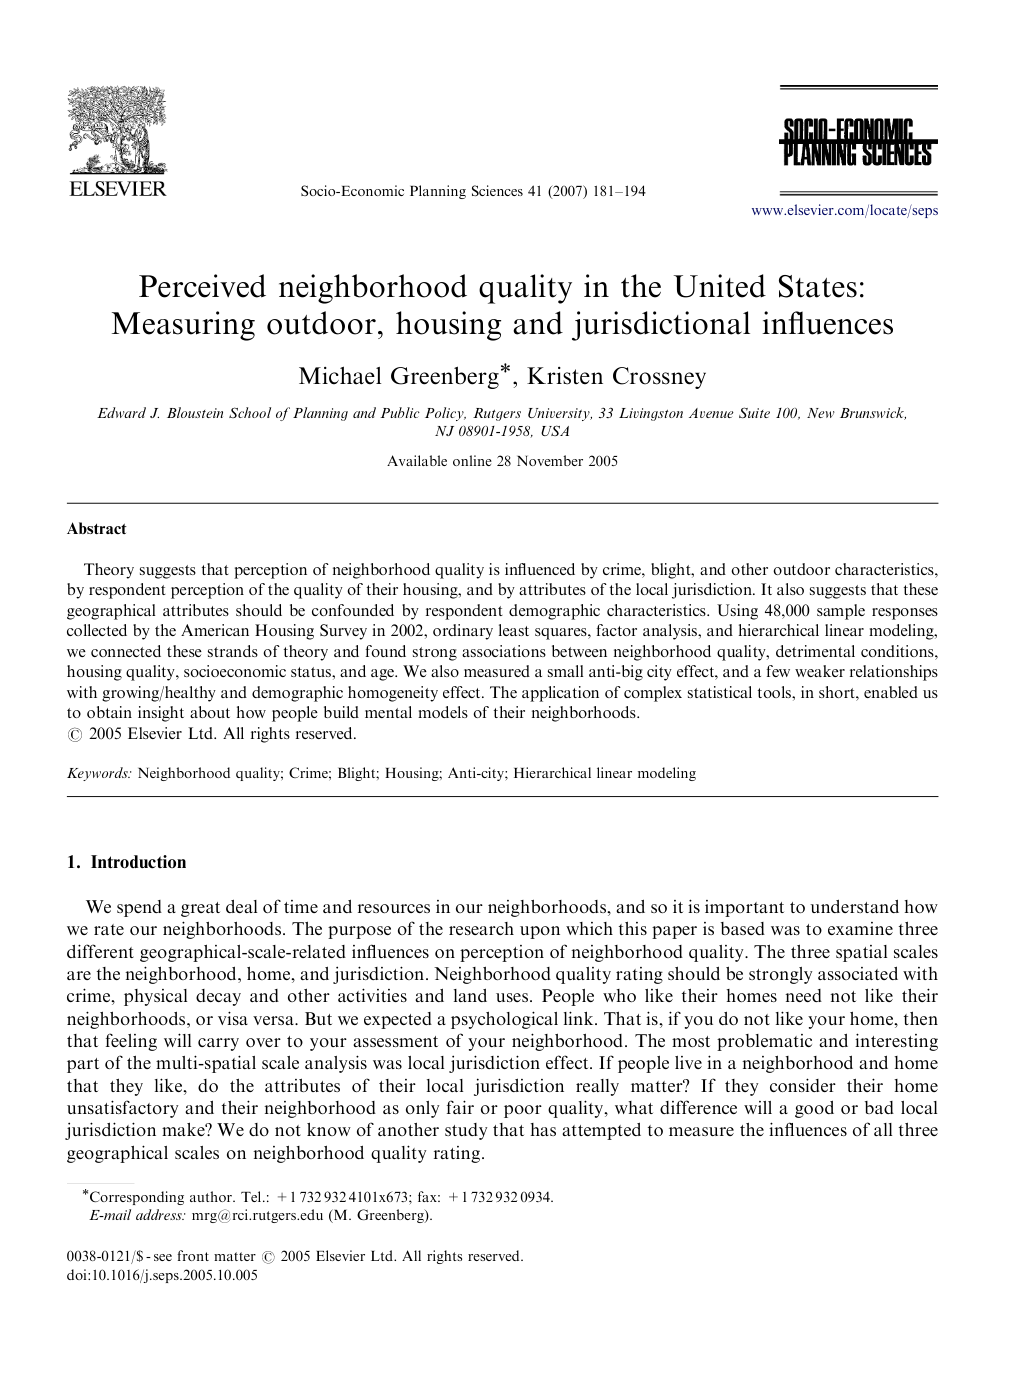 Perceived neighborhood quality in the United States